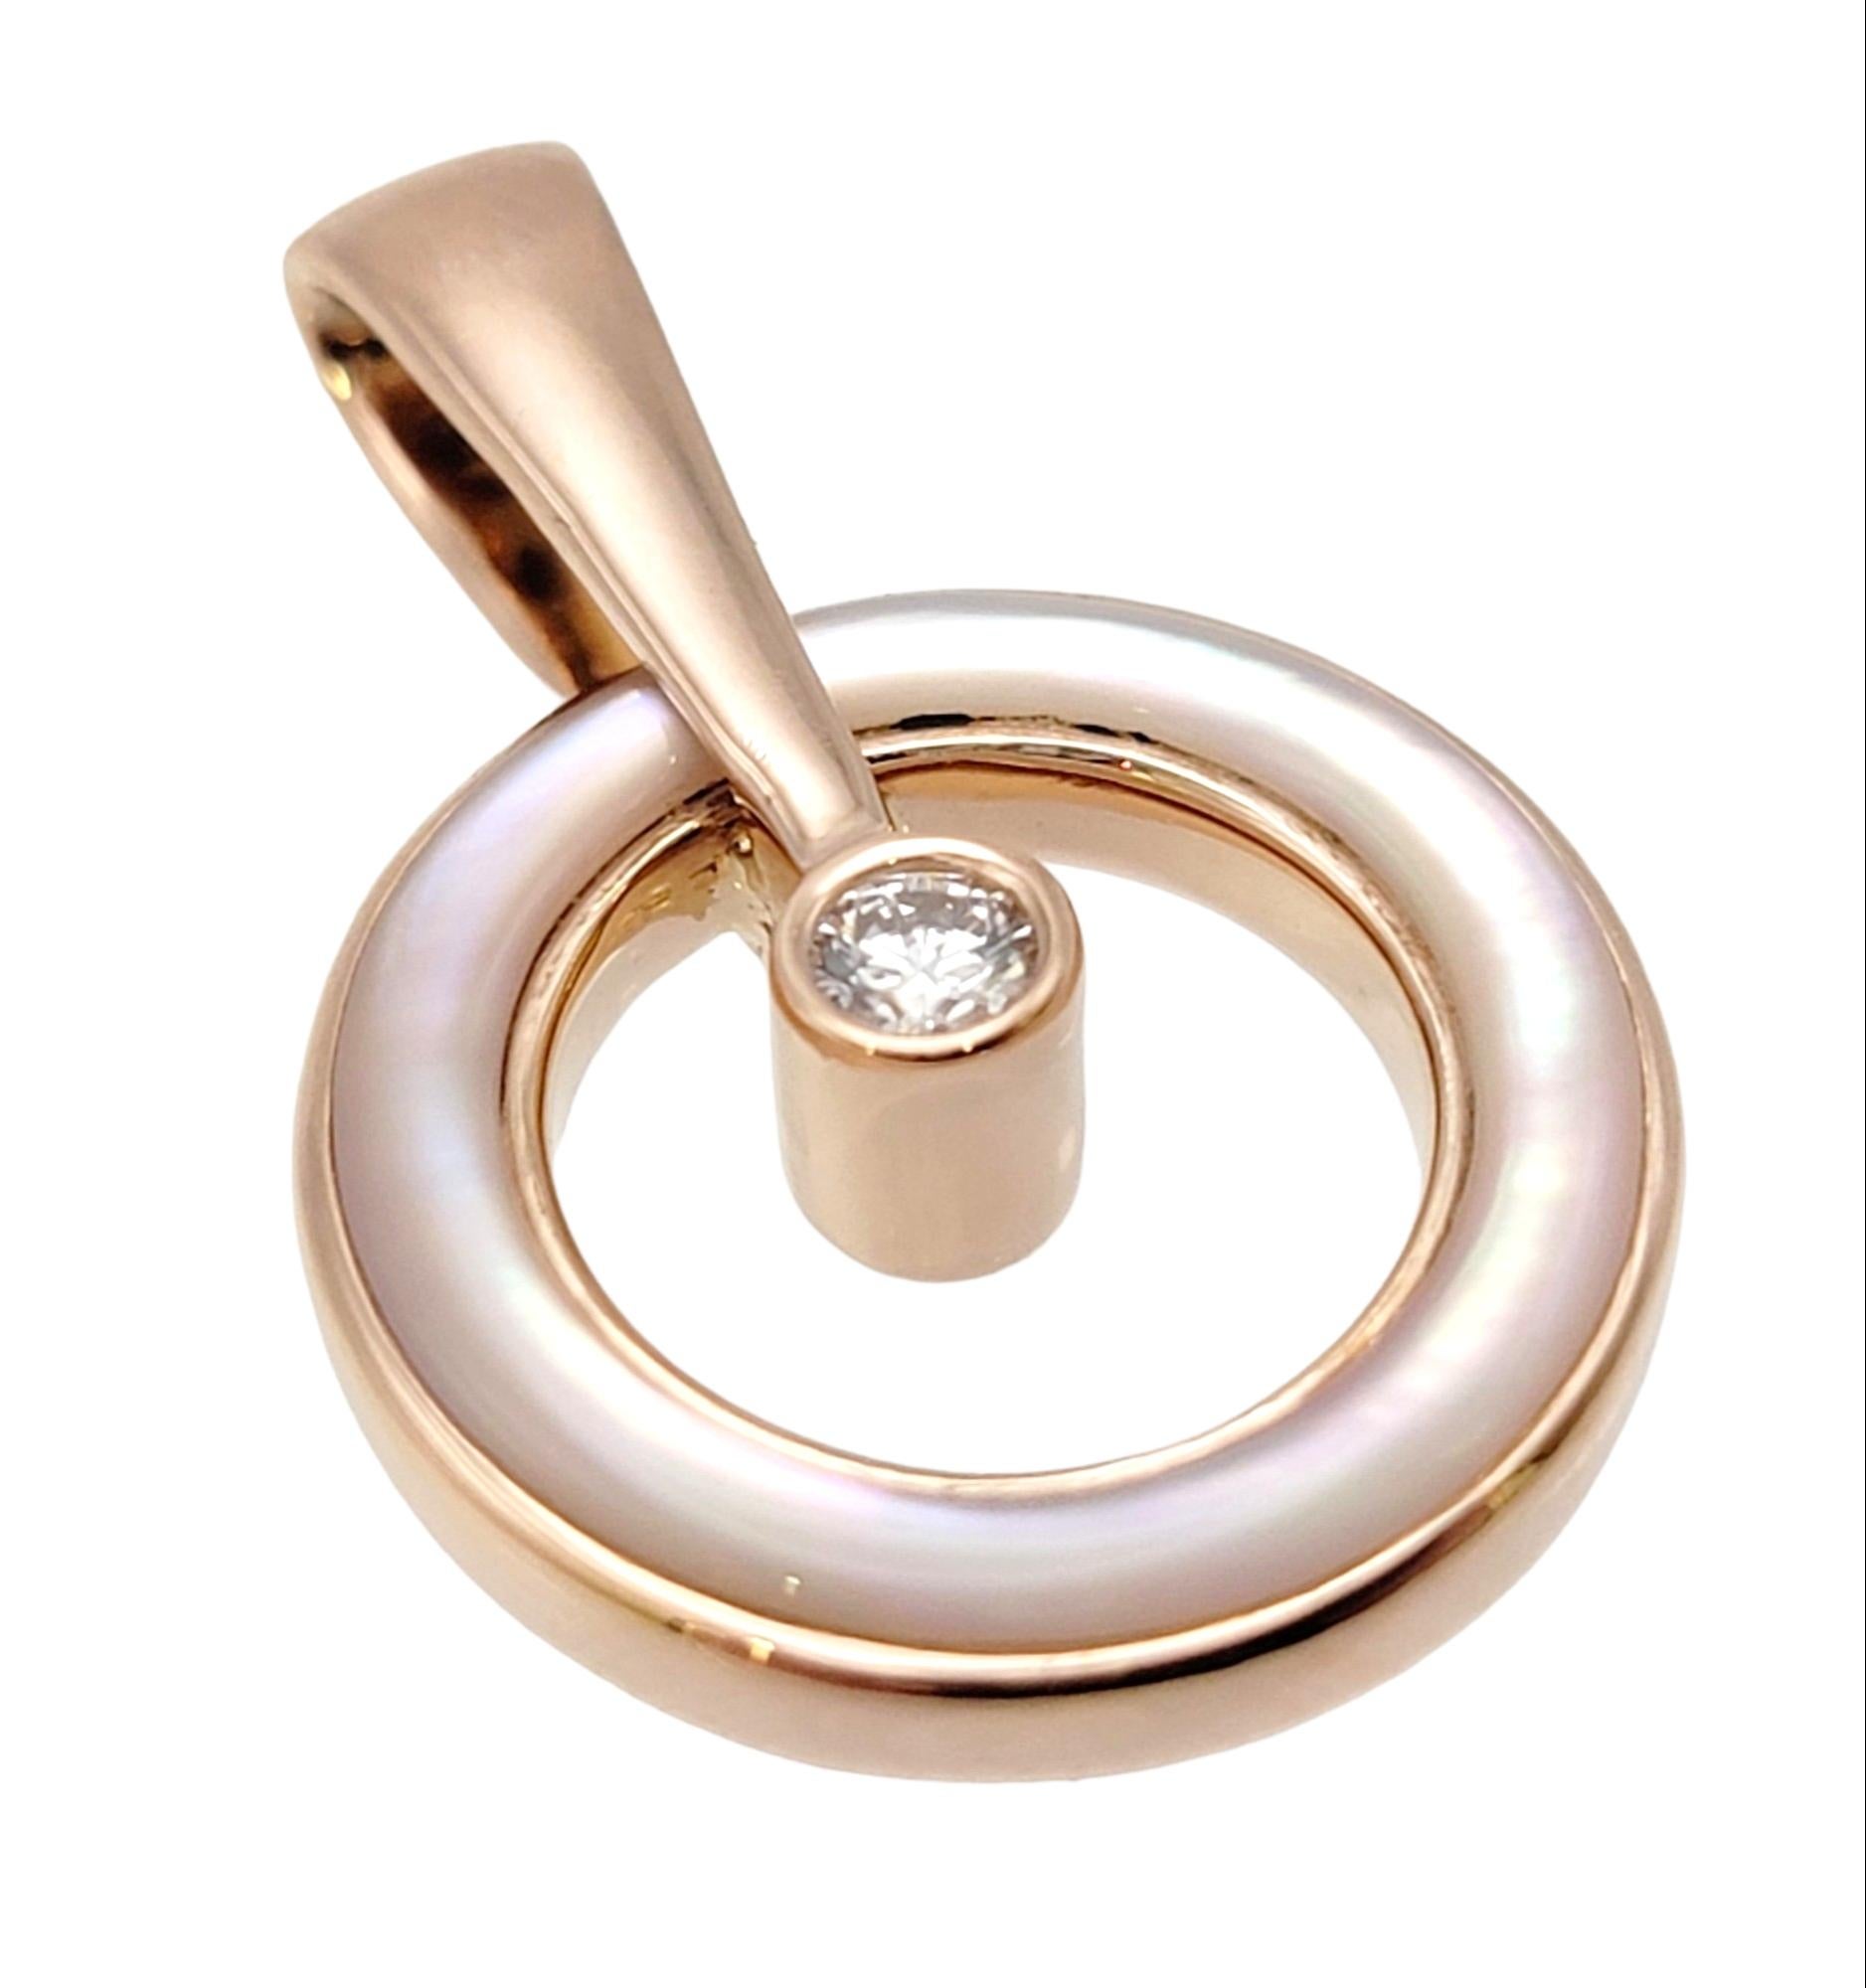 Captivating and contemporary mother of pearl and diamond circle pendant by jewelry designer, Kababa. This exquisite piece showcases the perfect fusion of artistry and elegance, destined to captivate hearts and spark admiration.

The pretty pendant